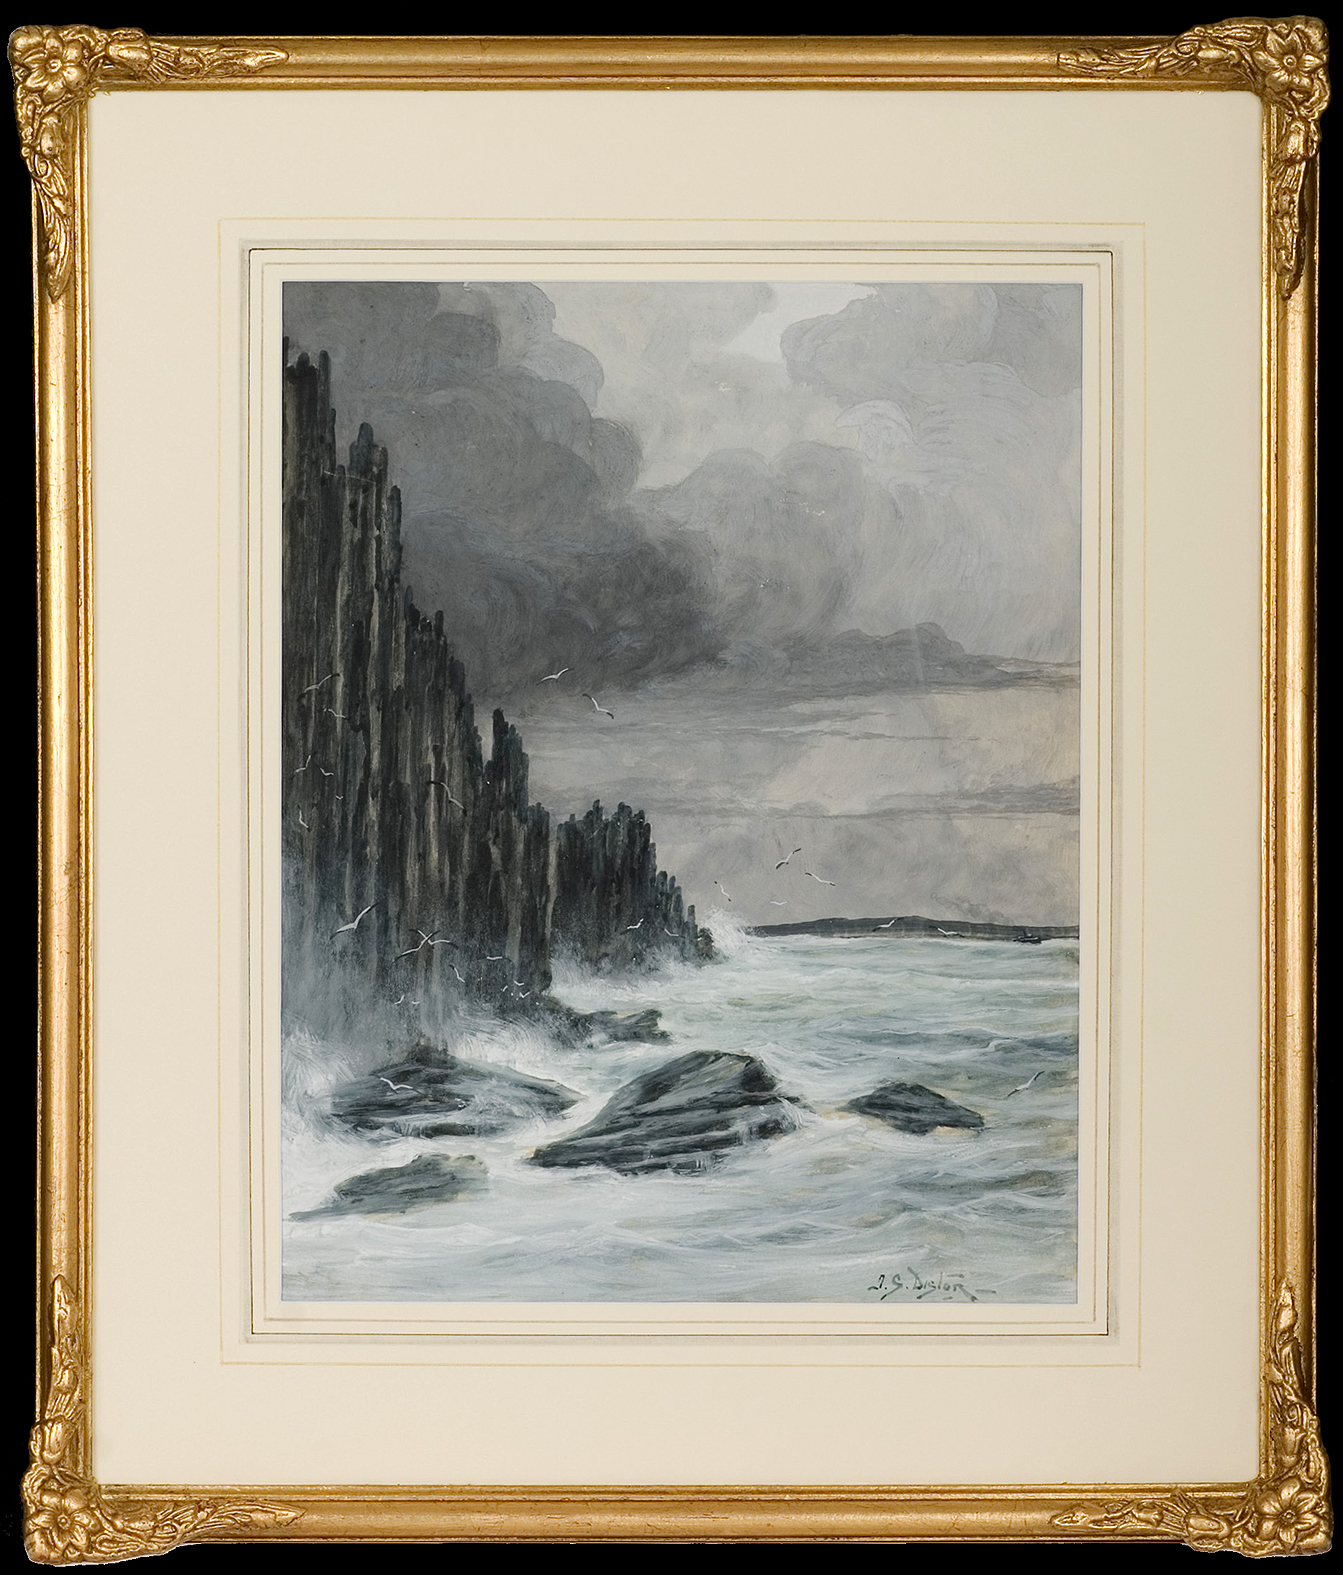 Cape Raoul Tasmania - Antique Painting from 1900